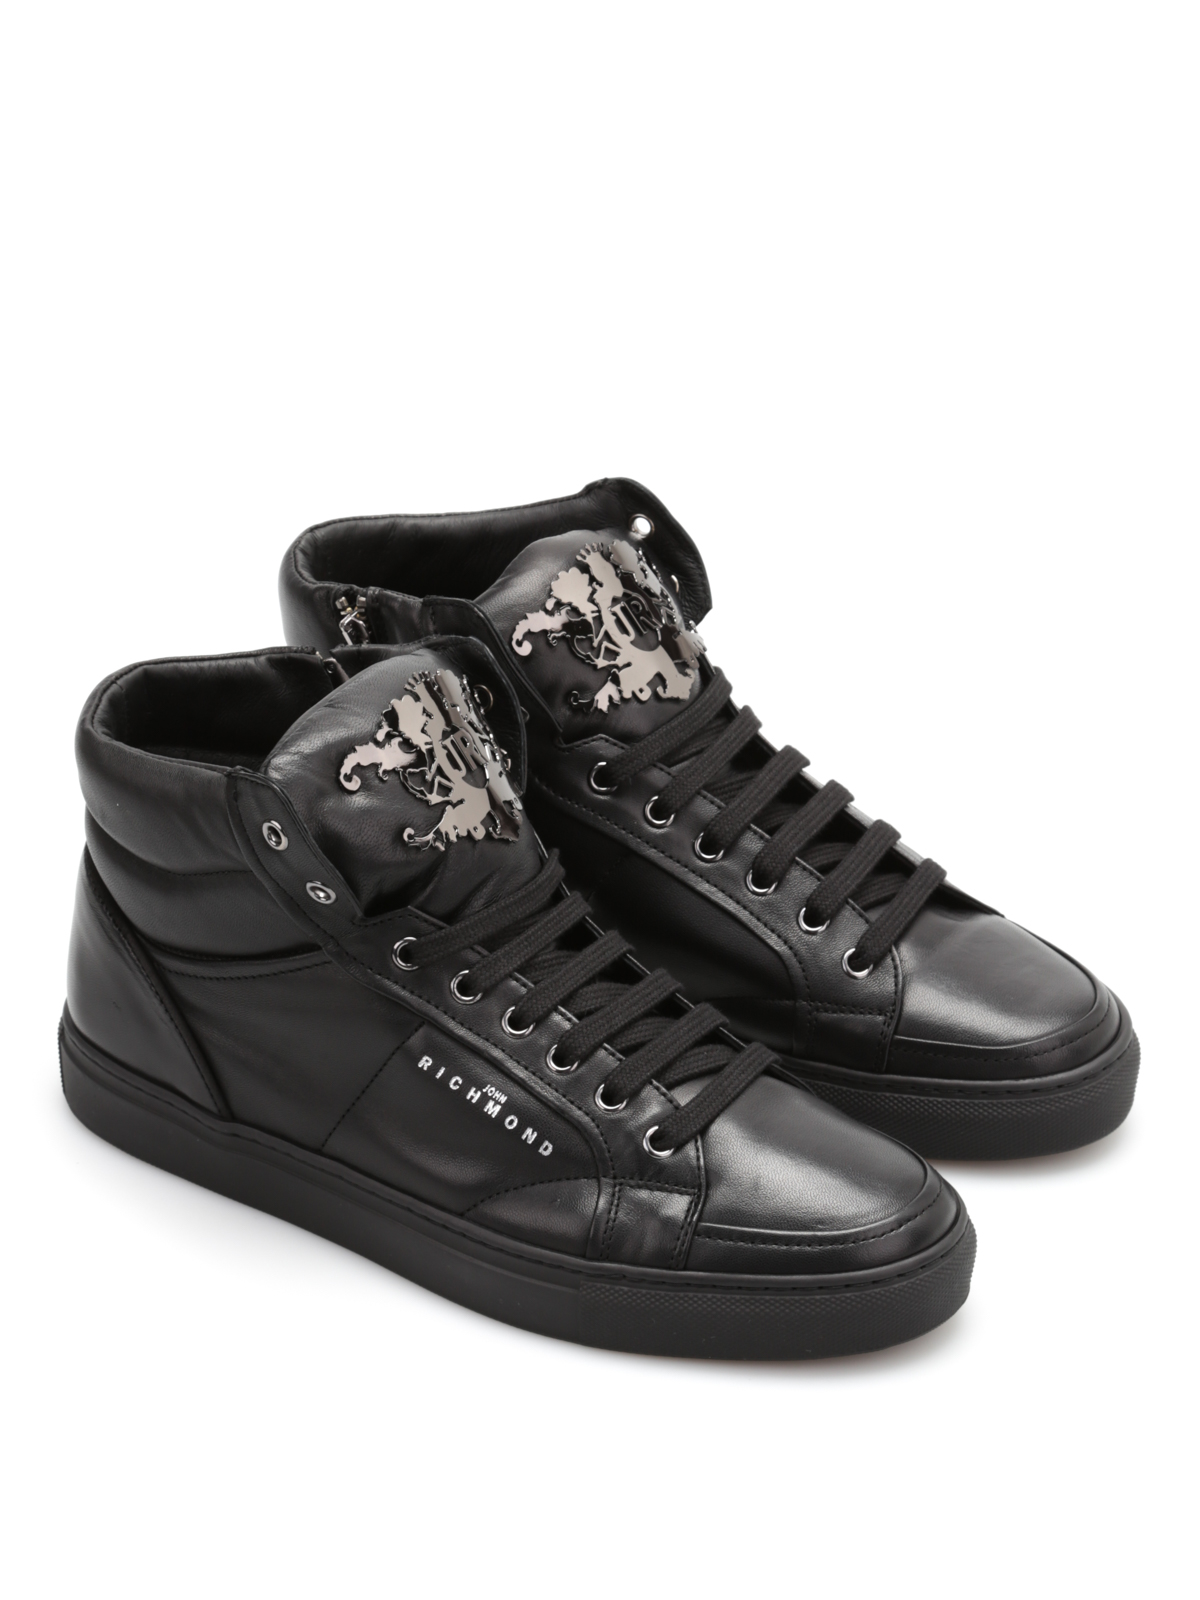 High-top sneakers with maxi logo by John Richmond ...